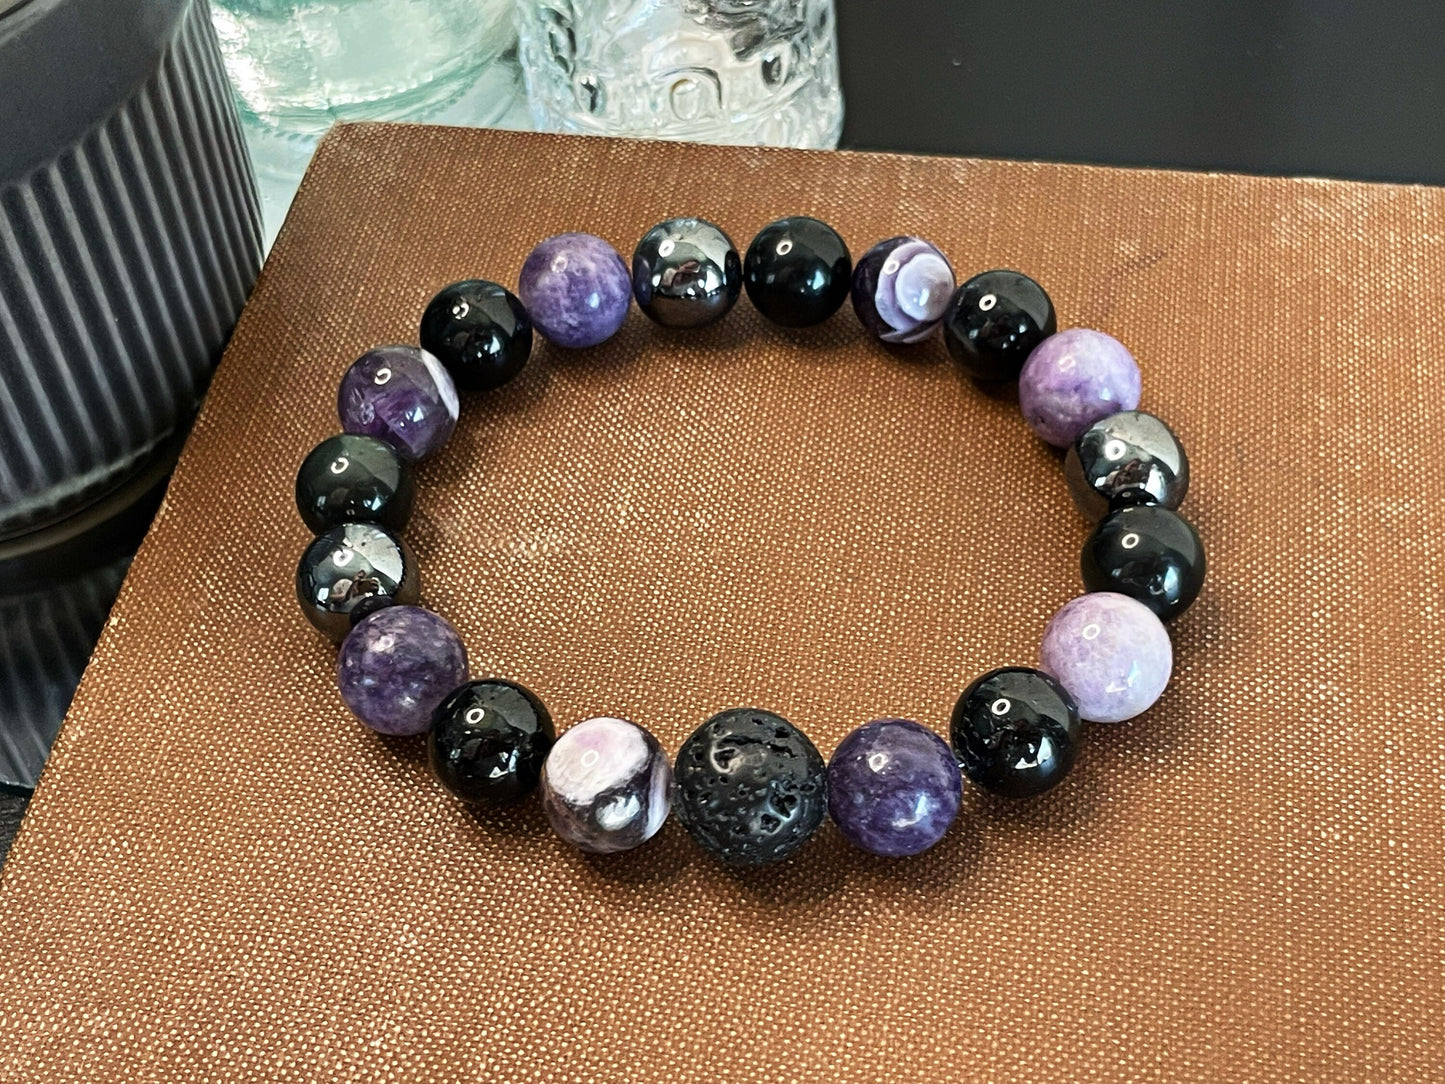 Amethyst and Tourmaline Protection Bracelet